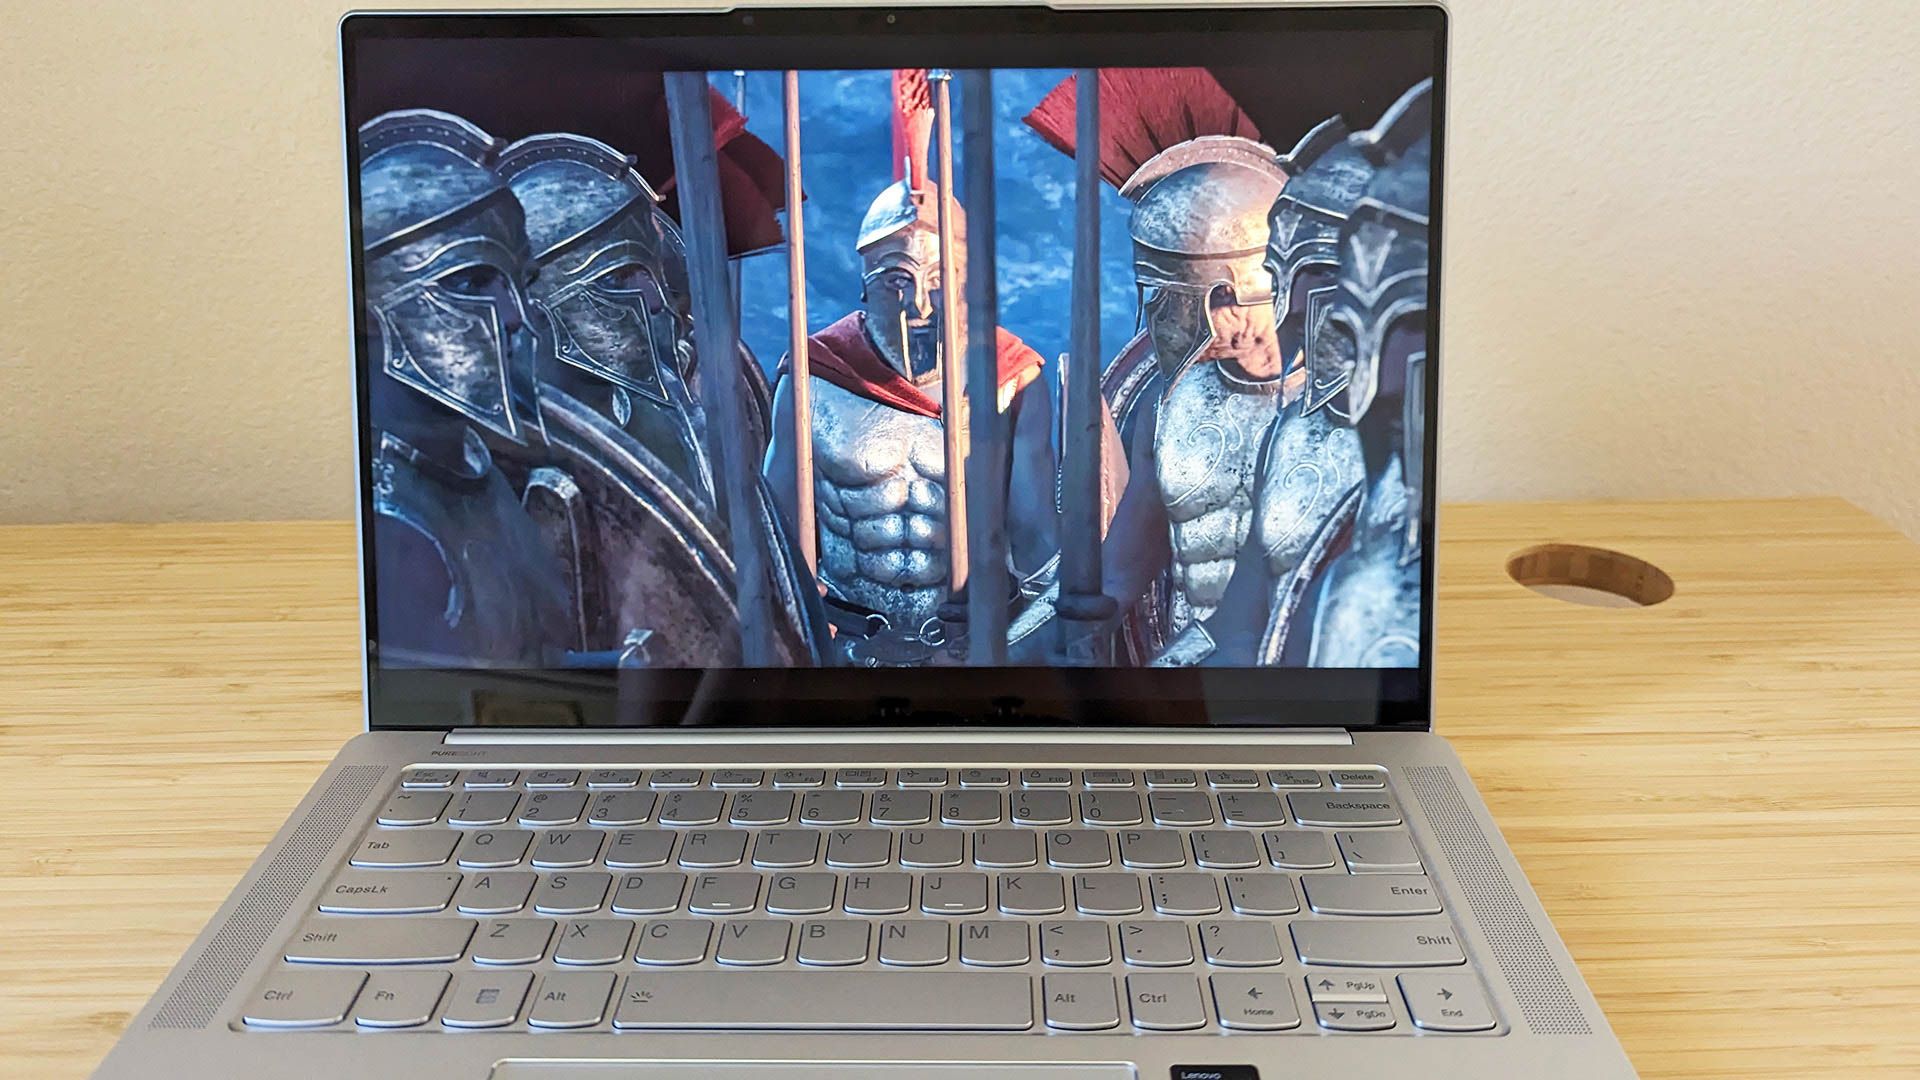 The Lenovo Slim 7i Pro X laptop with a game graphic on screen